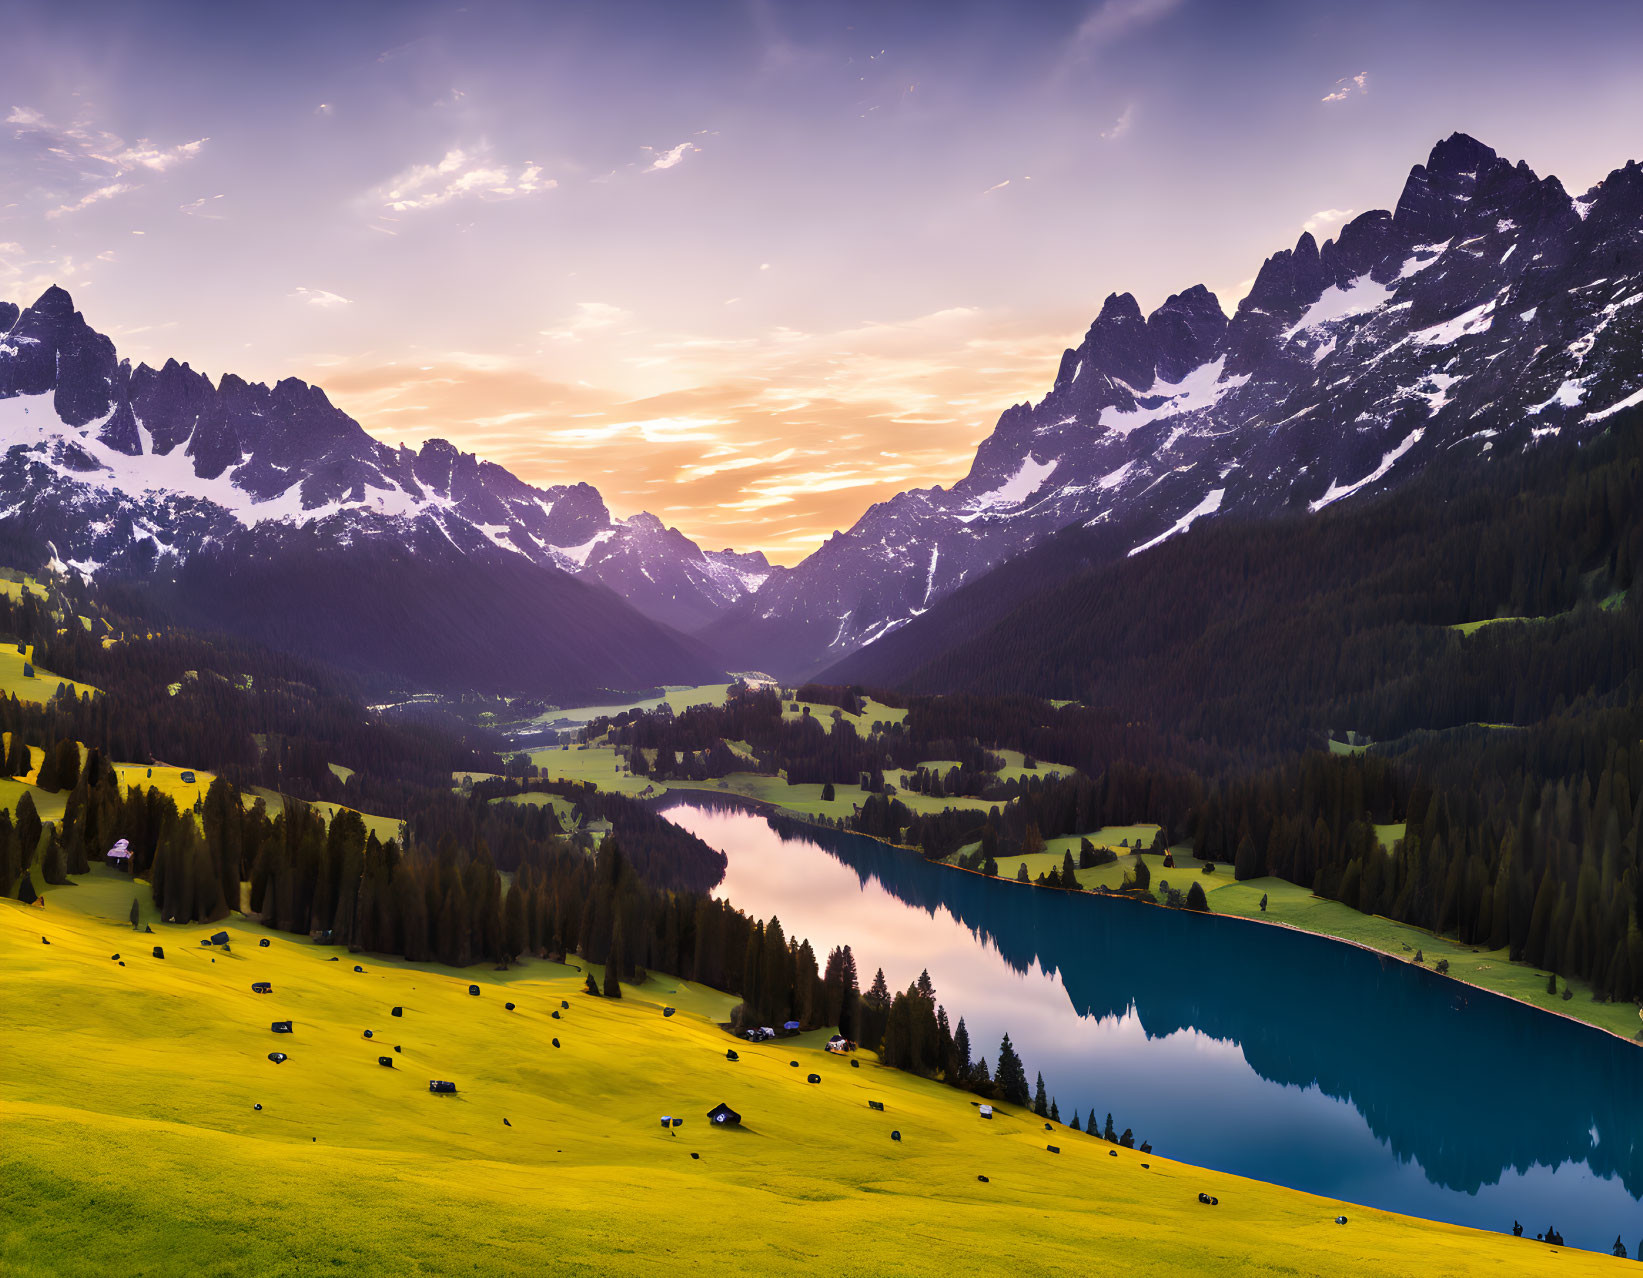 Tranquil mountain sunset with lake, meadows, cattle, and vibrant sky